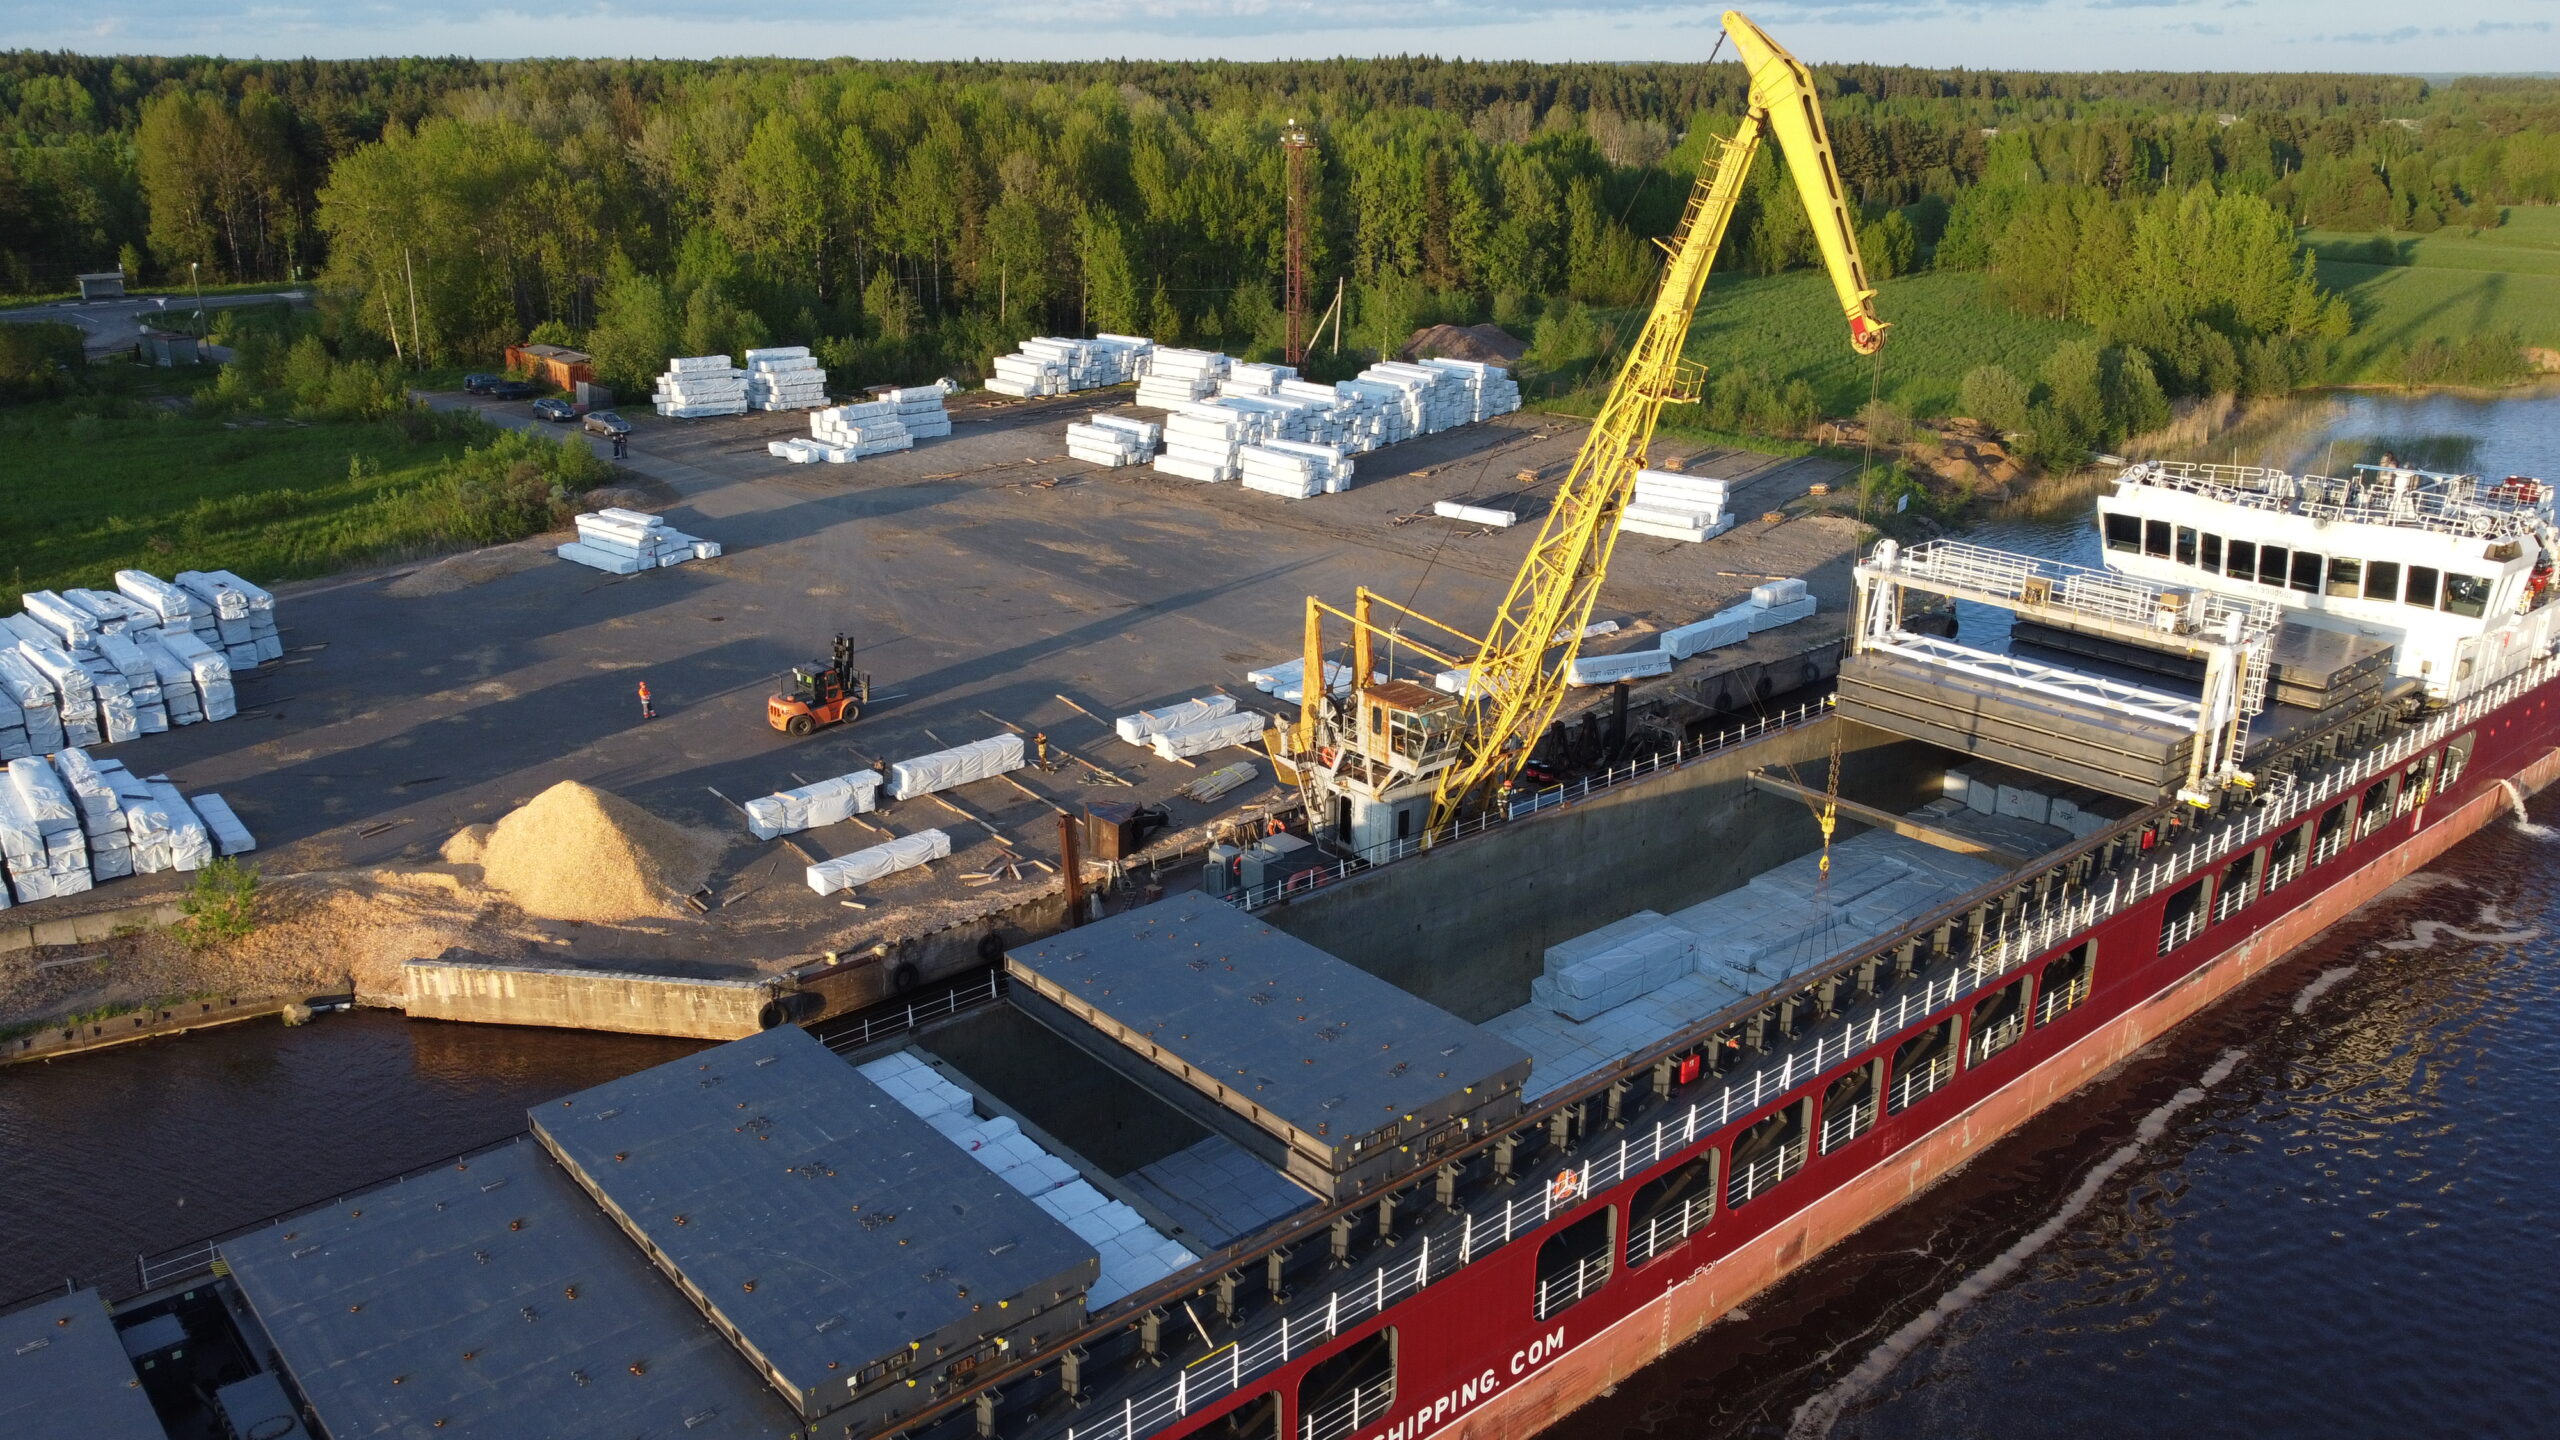 Vologda timber group of companies has opened the navigation